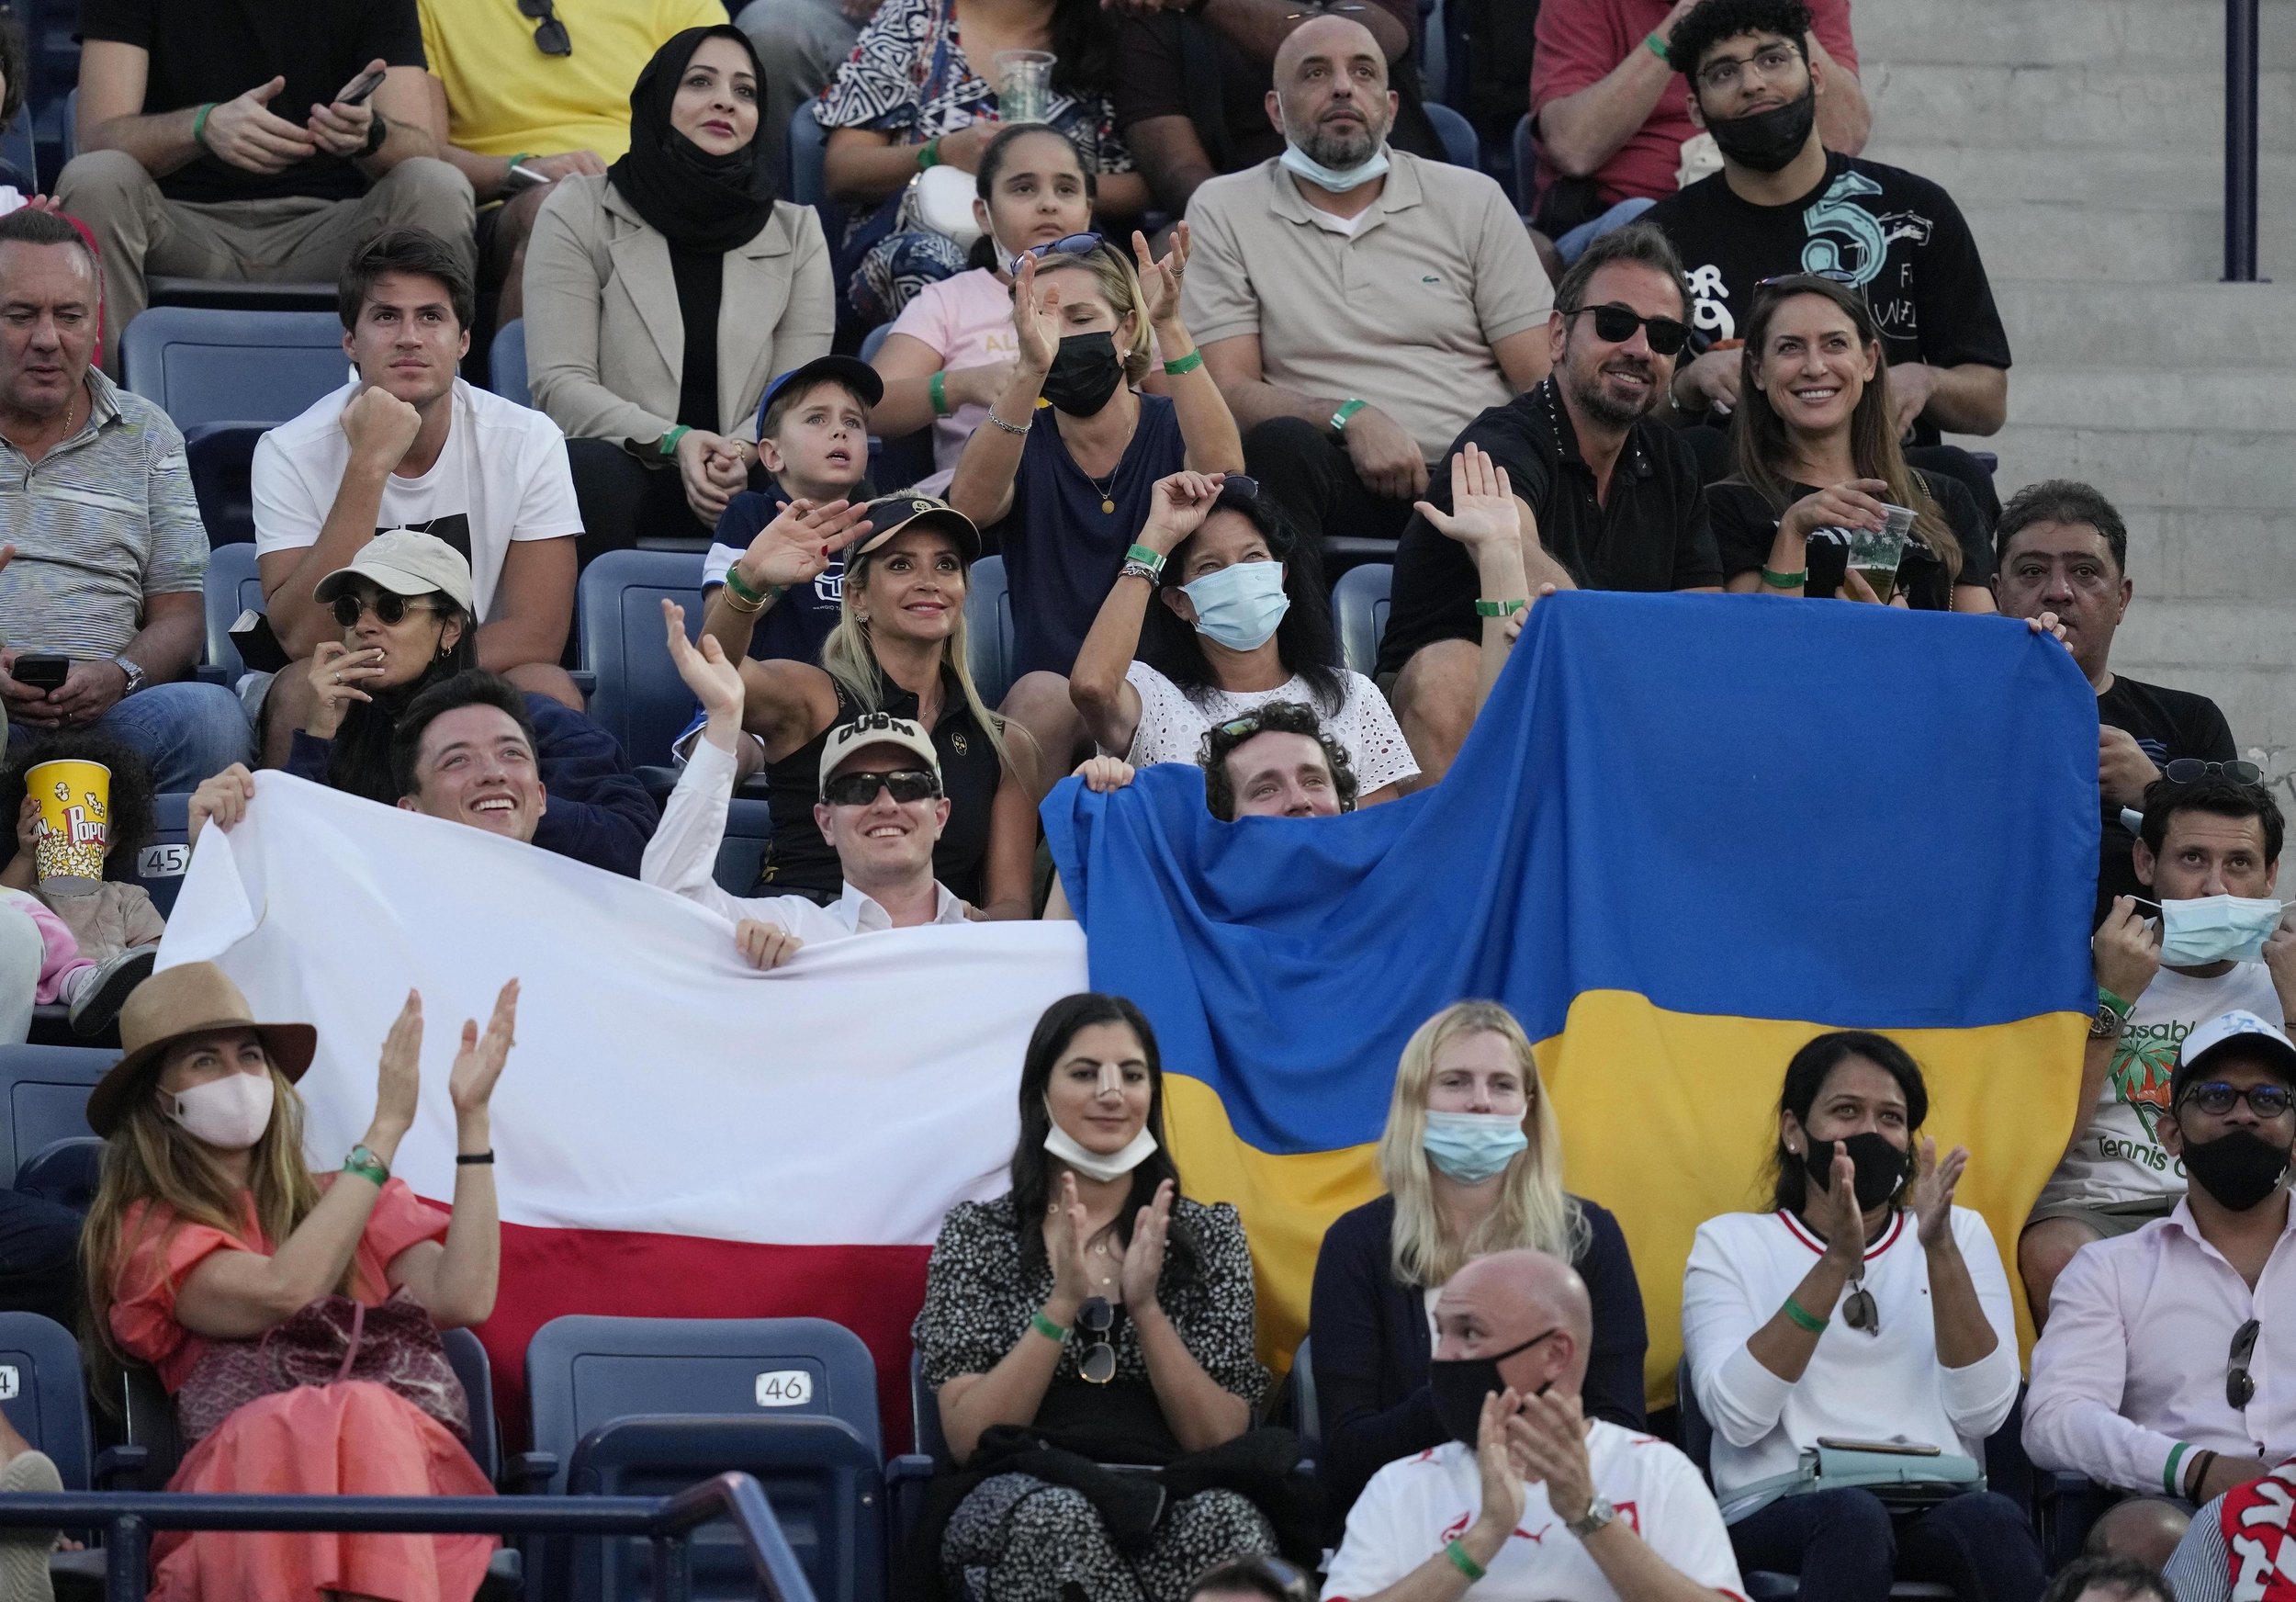  Fans hold a Ukraine national flag next to a Polish flag during a semifinal tennis match between Russia's Andrey Rublev and Poland's Hubert Hurkacz at the Dubai Duty Free Tennis Championship in Dubai, United Arab Emirates, Feb. 25, 2022. (AP Photo/Ka